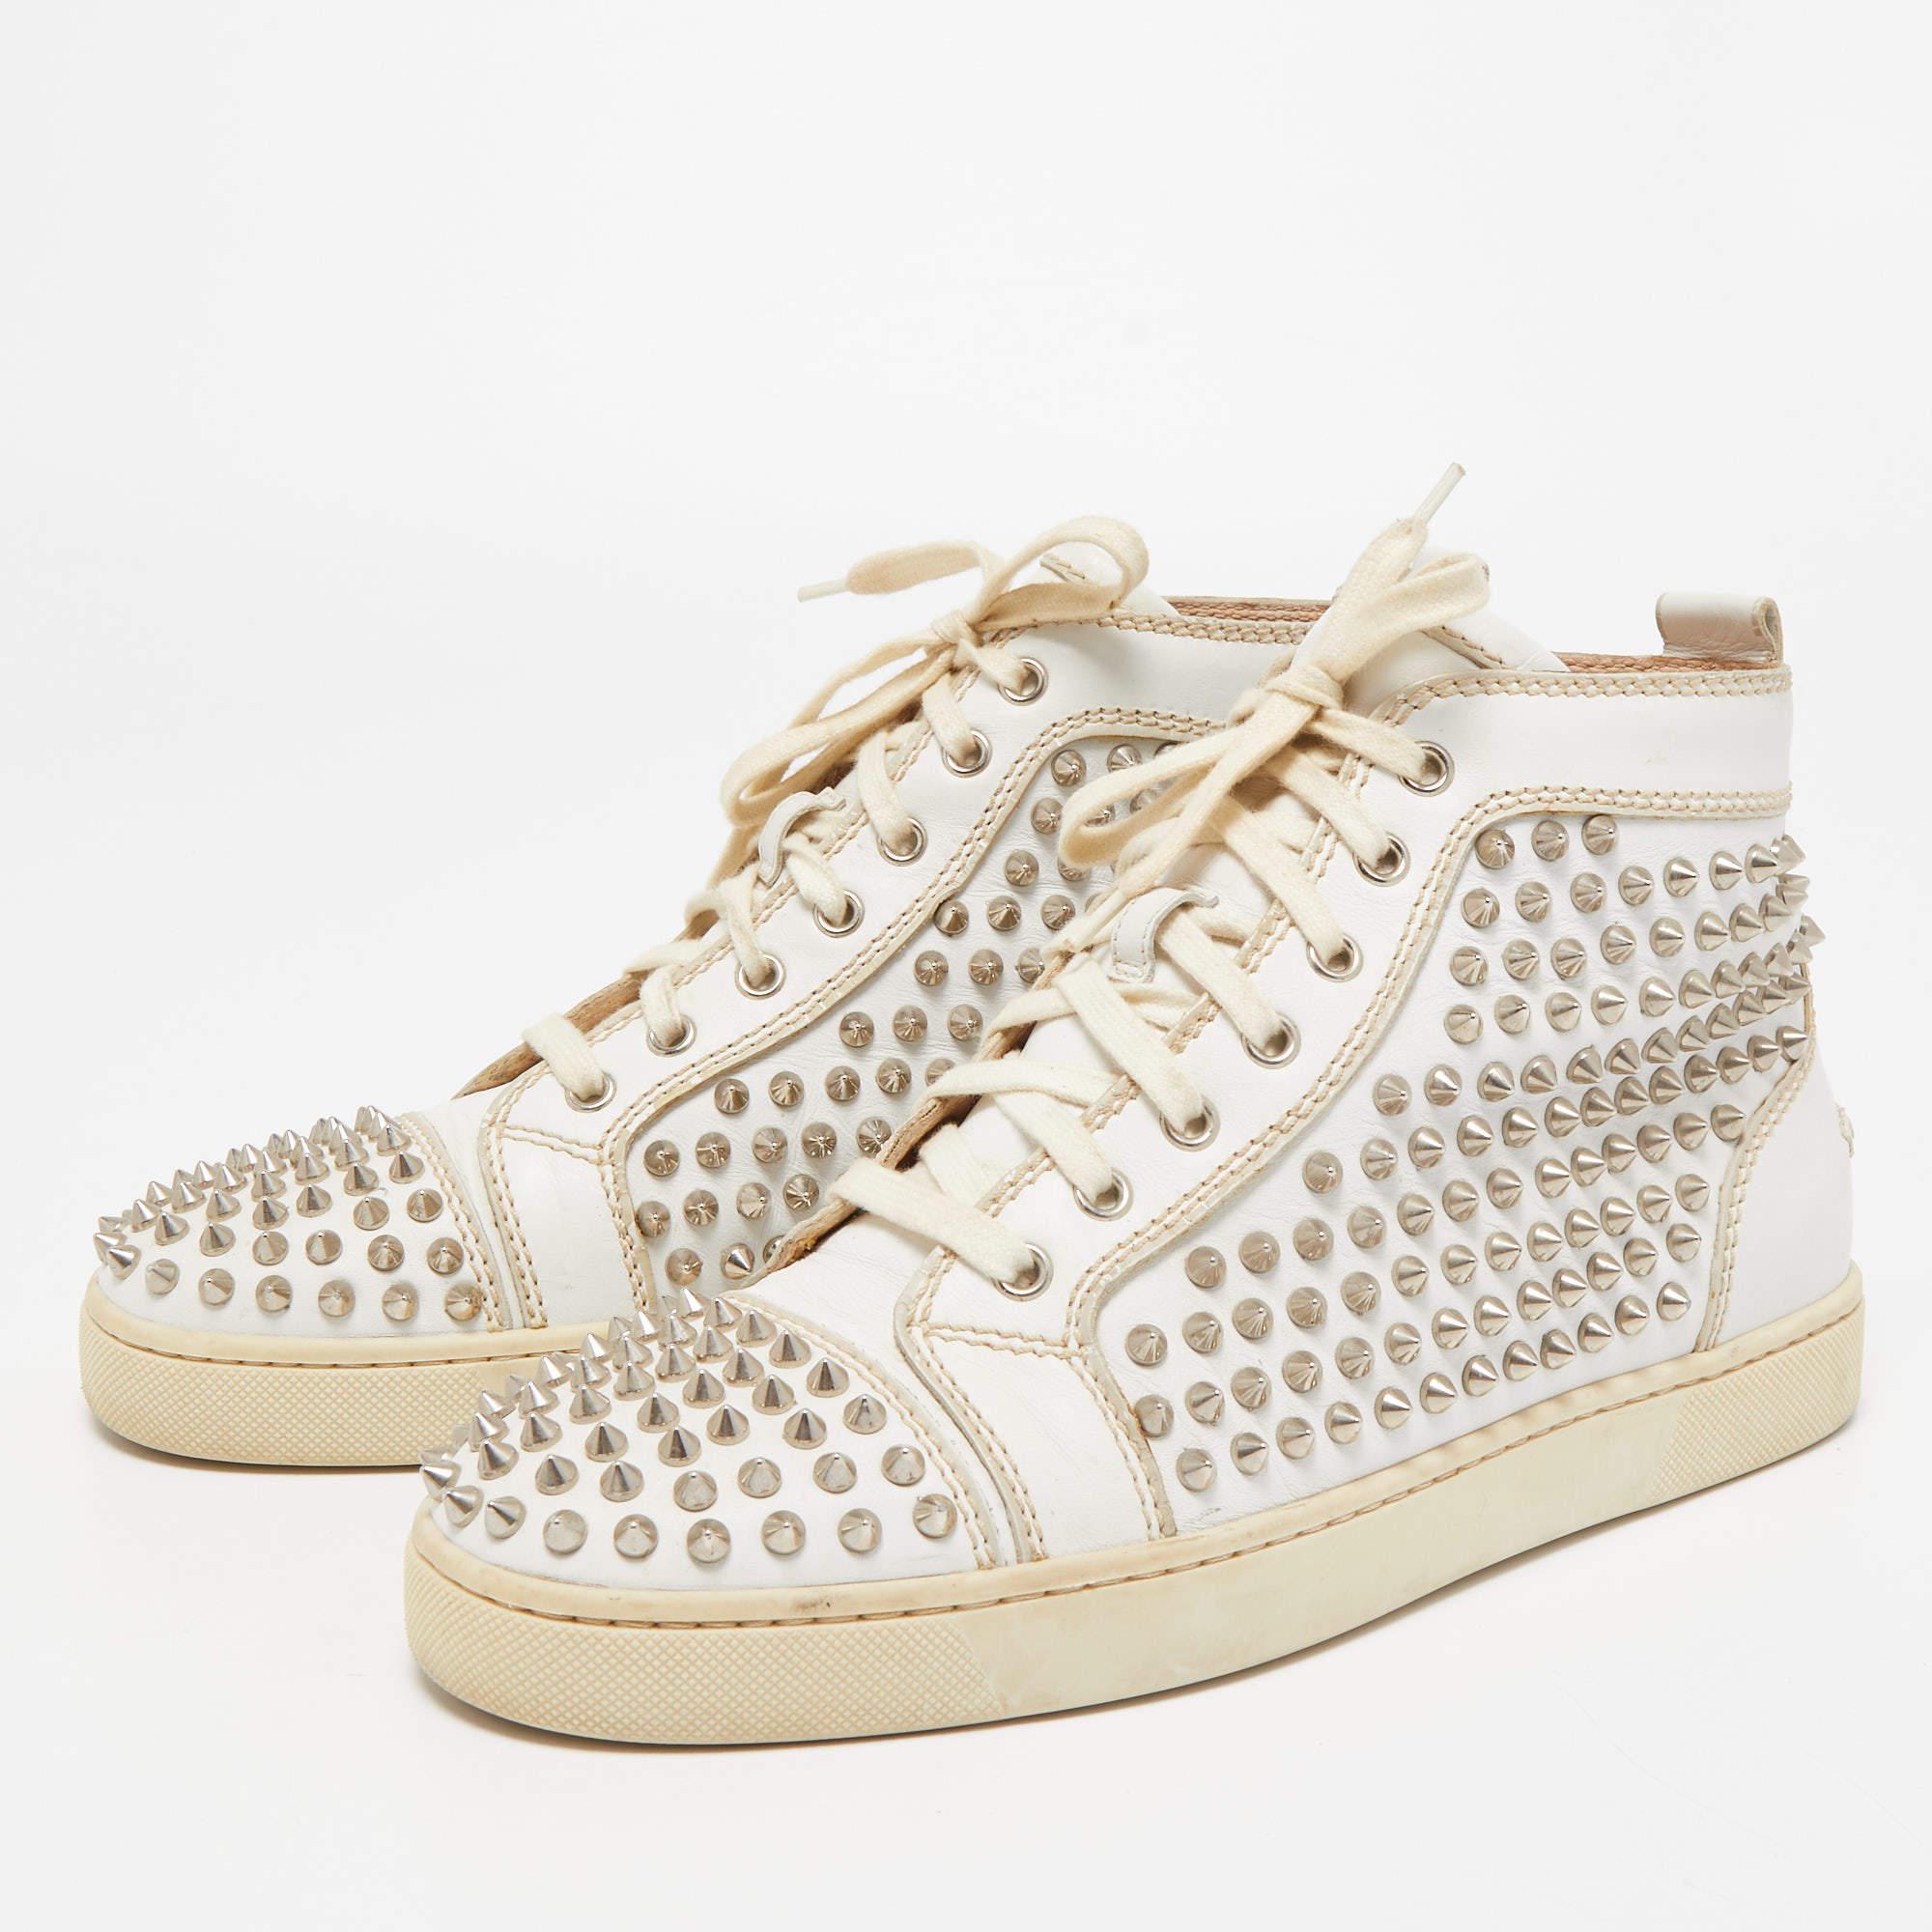 Christian Louboutin White Leather Louis Spikes High Top Sneakers Size 41 2